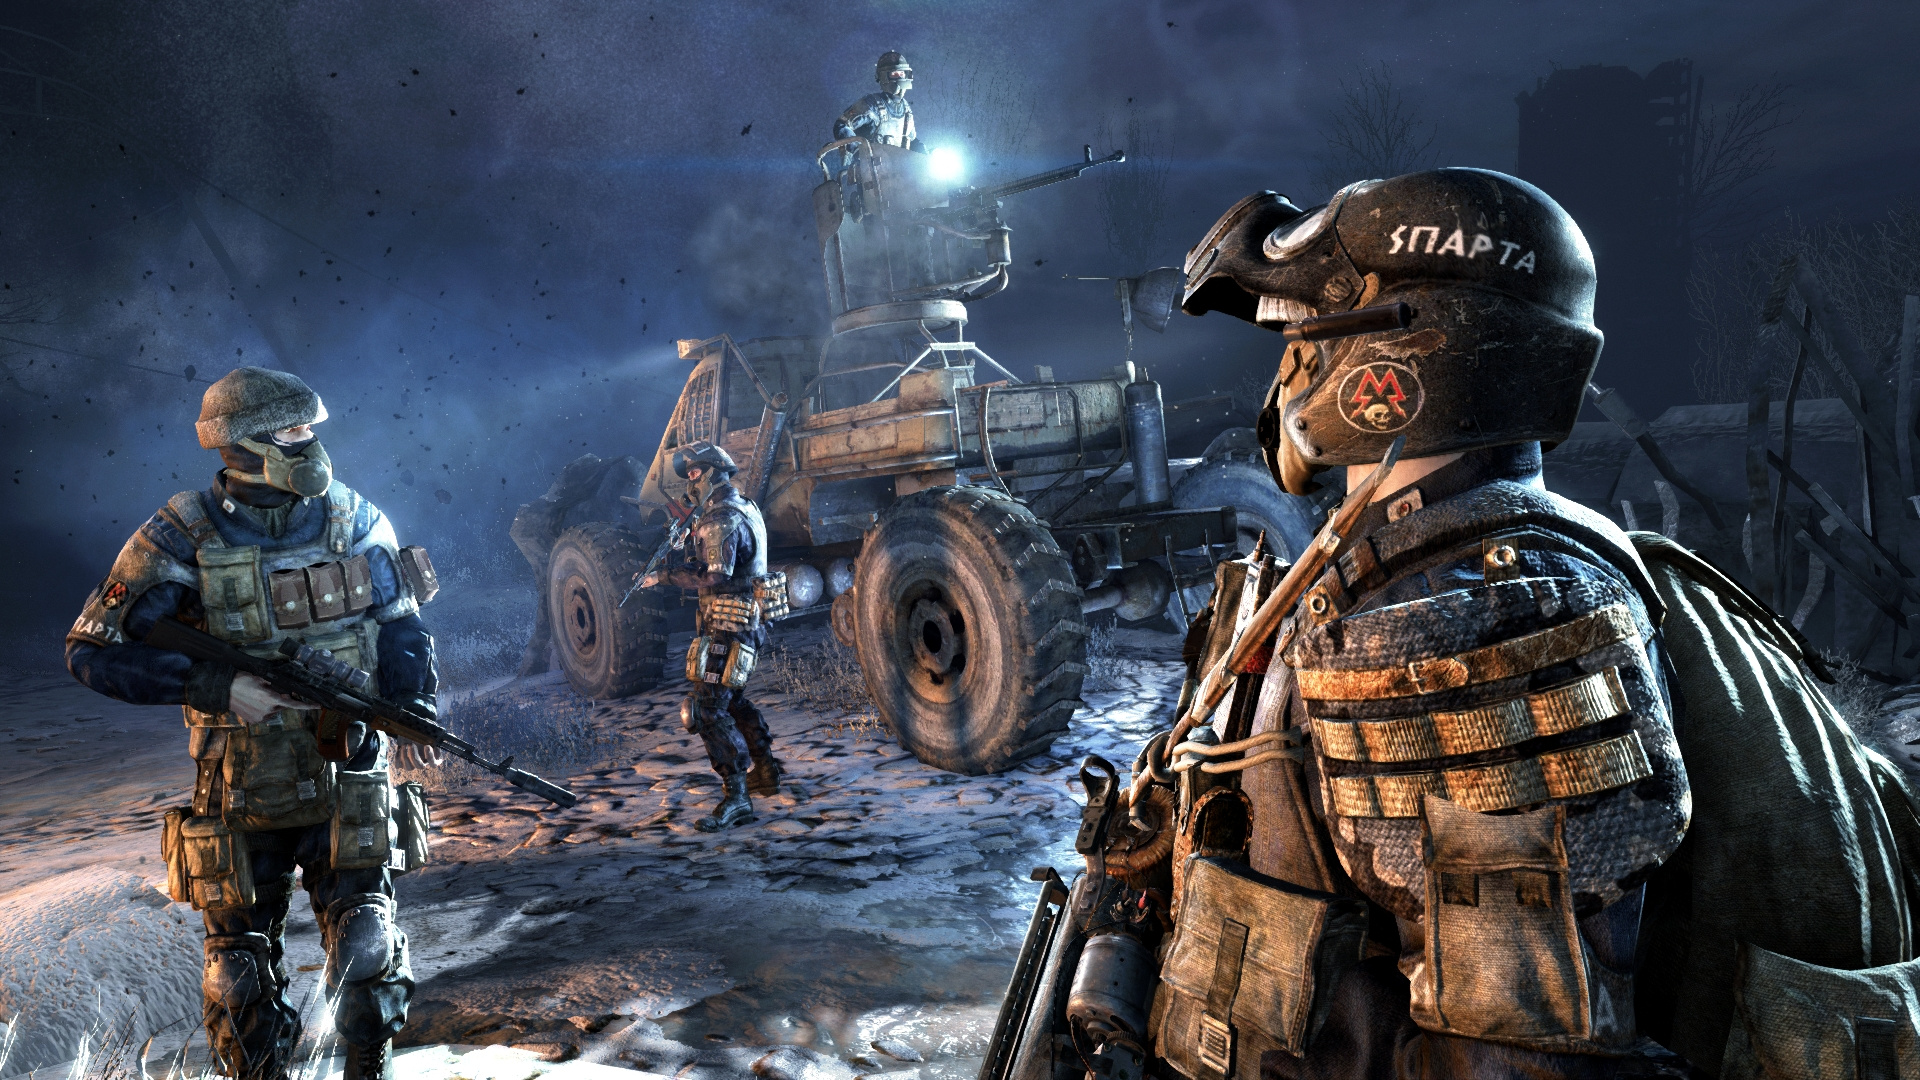 Metro Redux (PS4 / PlayStation 4) Game Profile News, Reviews, Videos